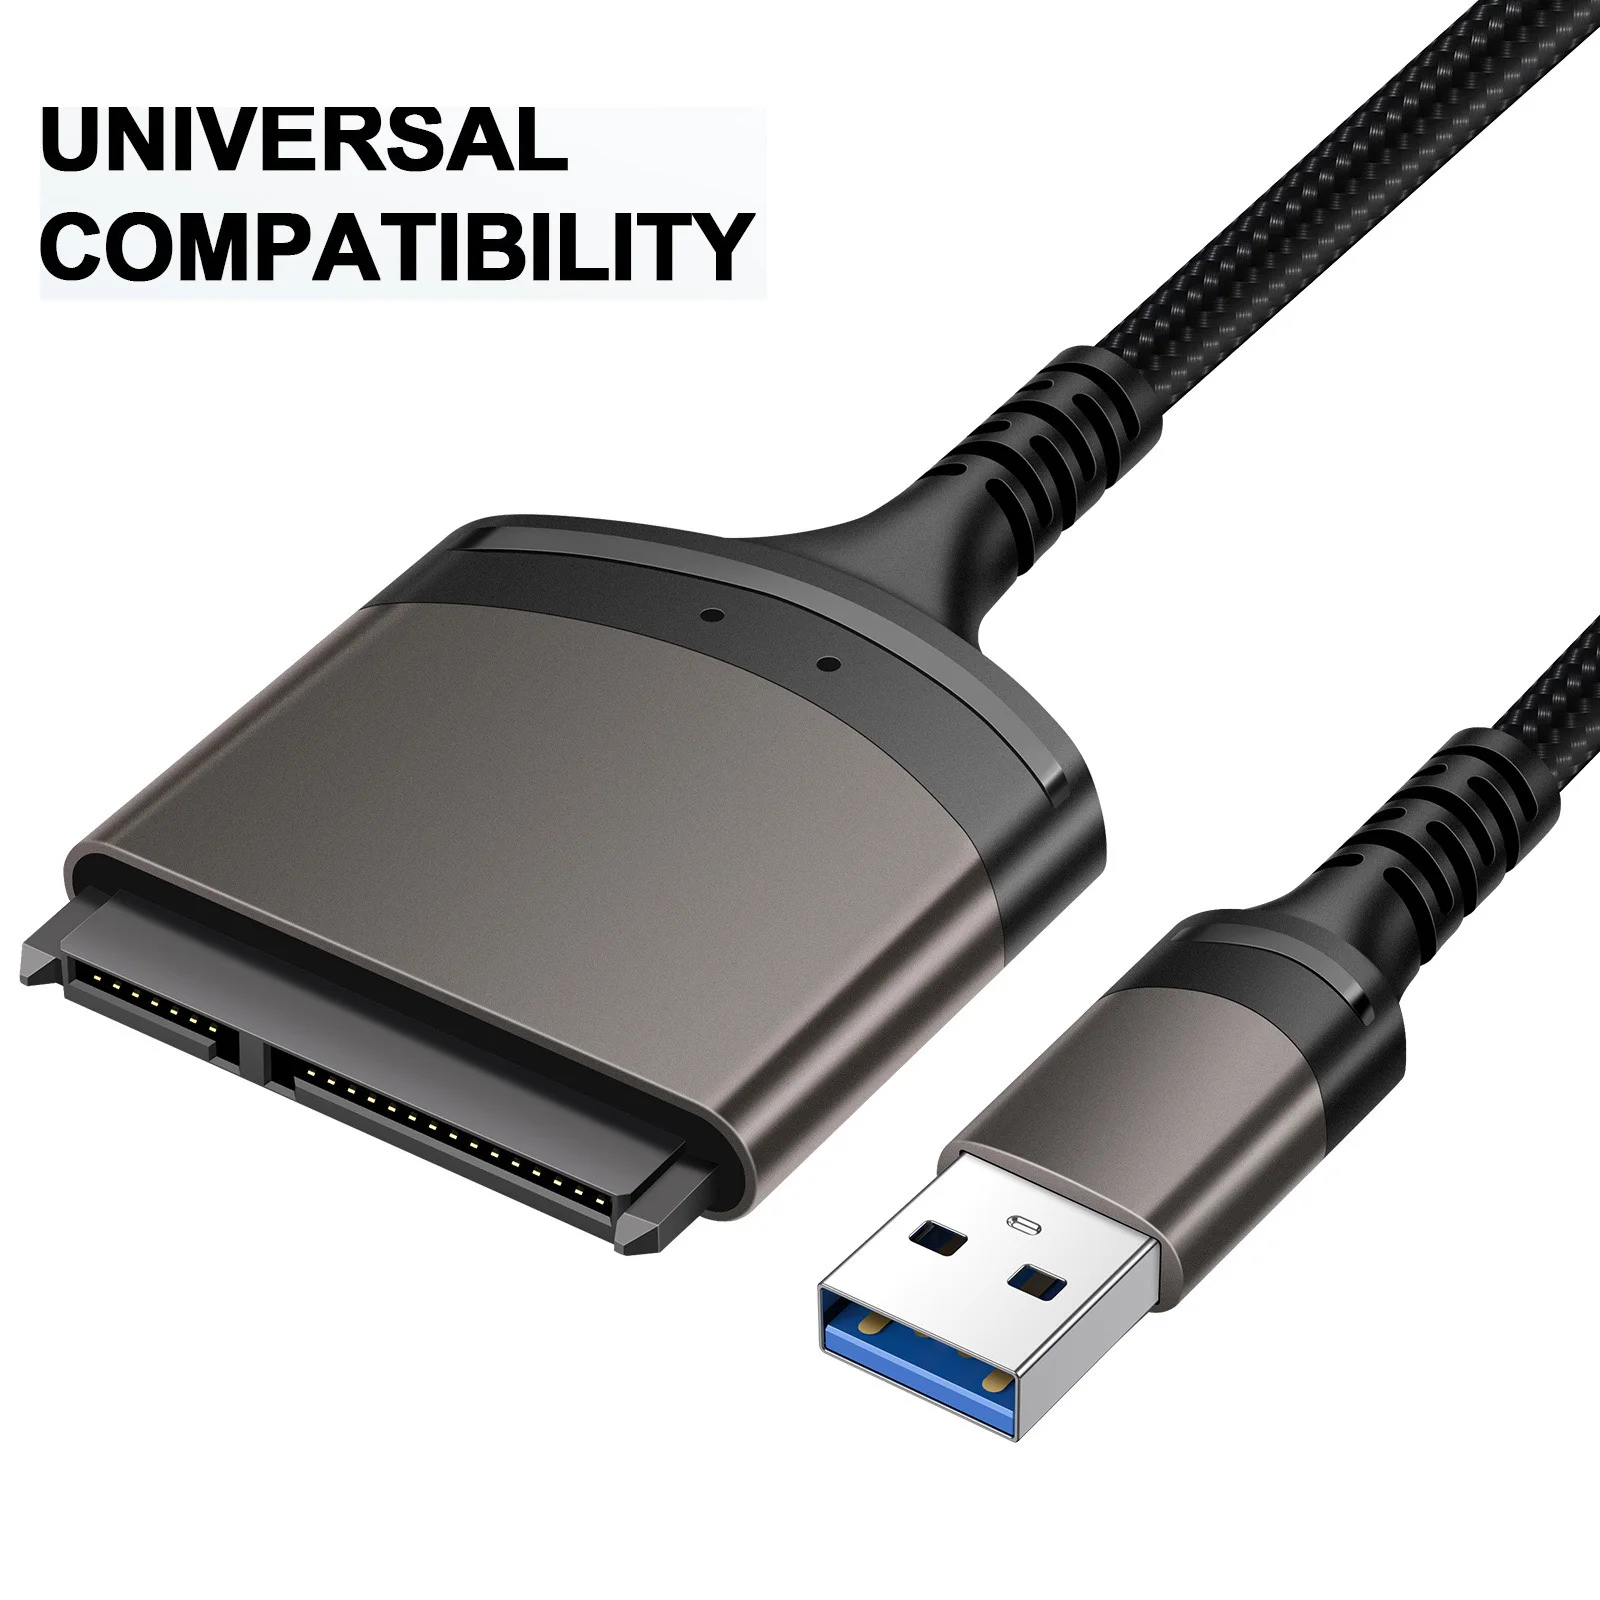 USB3.0 to SATA 3 Cable Sata To USB C Adapter UP To 6 Gbps SATA Cable 2.5Inch External SSD HDD Hard Drive 22 Pin Sata III for PC